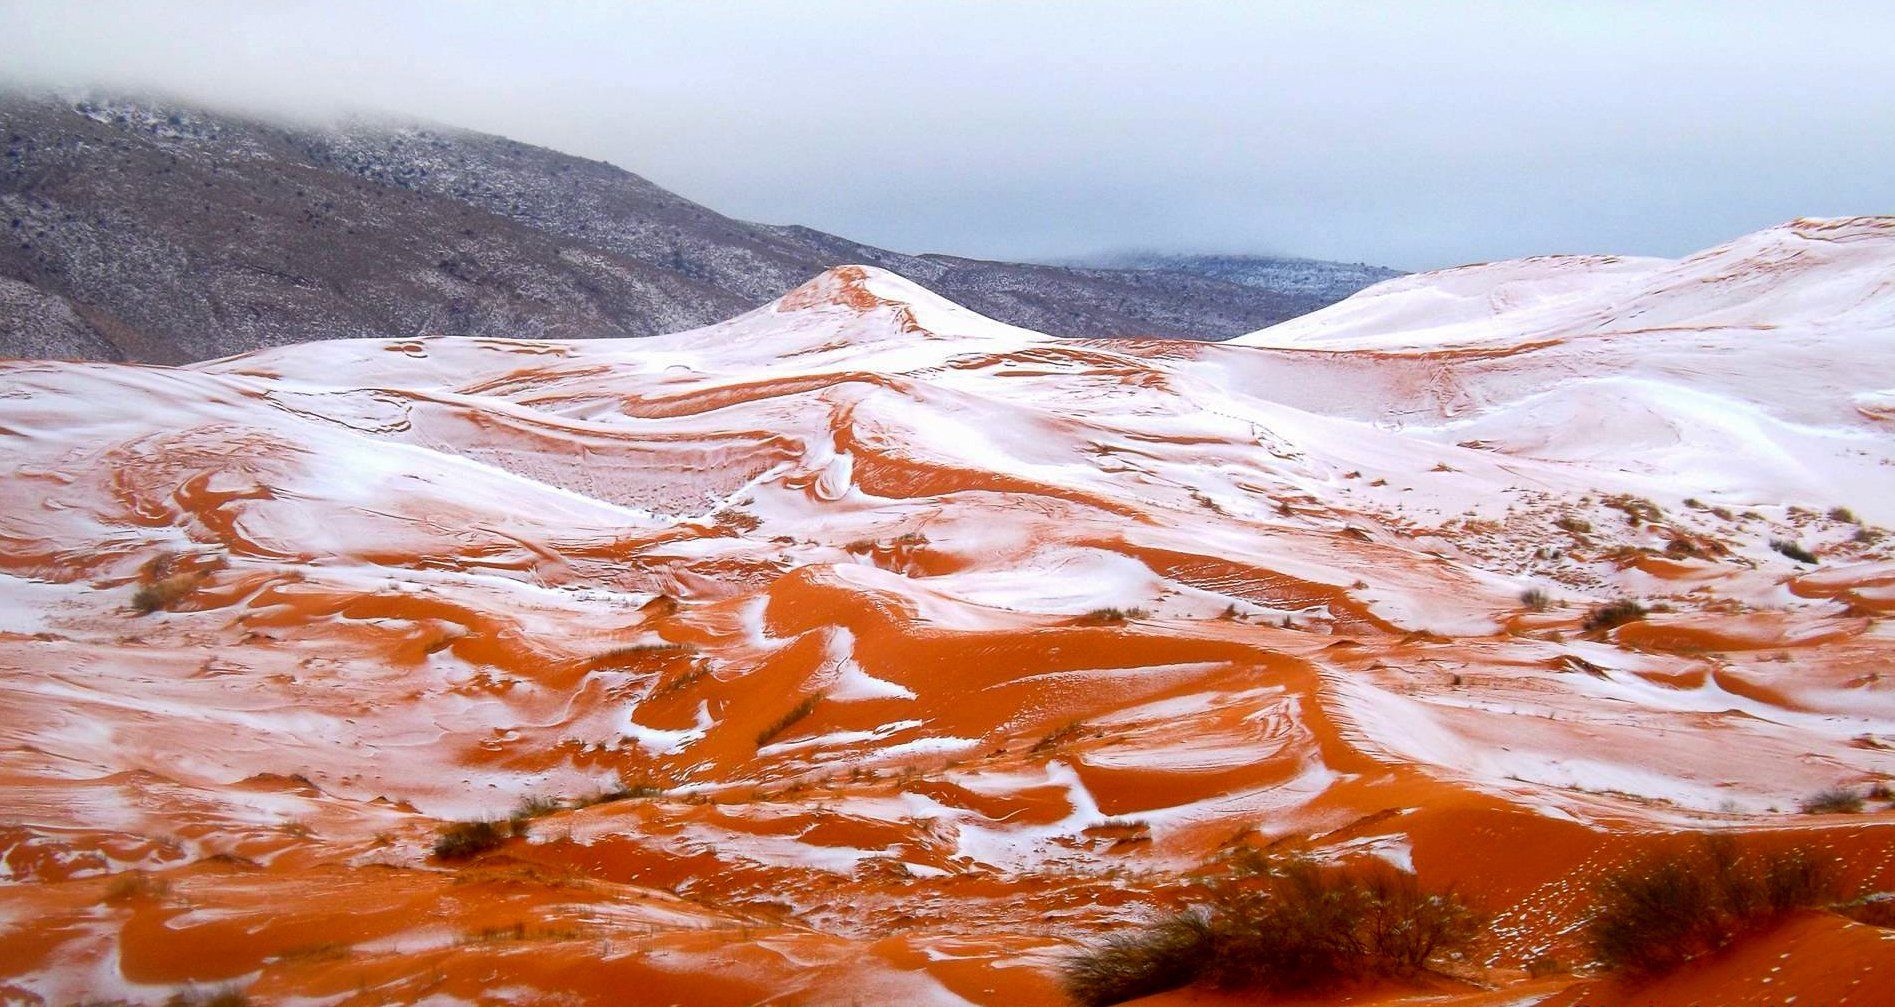 Snow falls in Sahara desert for first time in 37 years